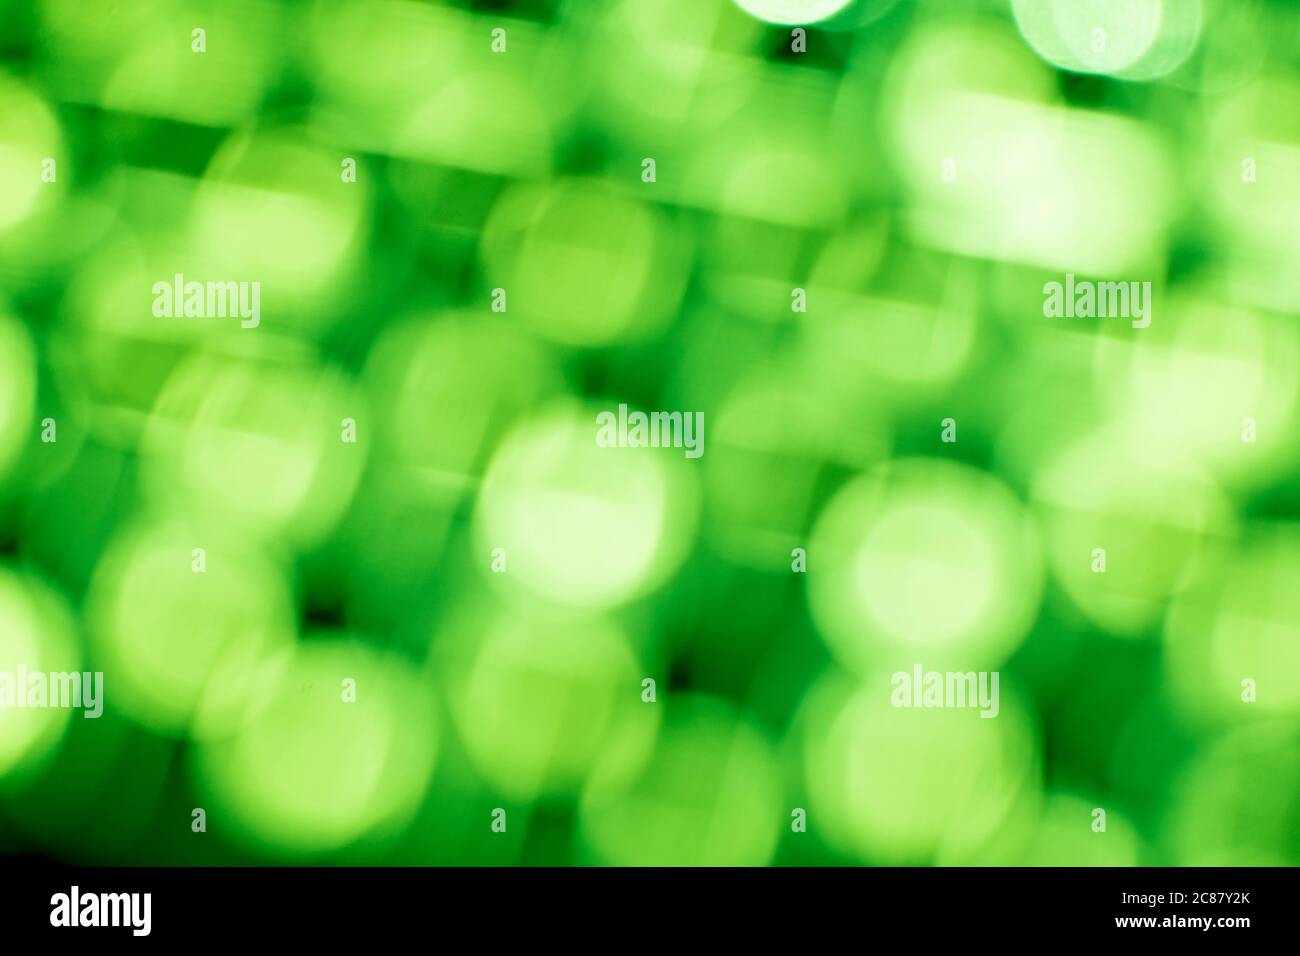 Green bokeh light backgrounds. Blurred defocused dots. Abstract blurred reflection lighting. Bokeh with festive light background. Stock Photo